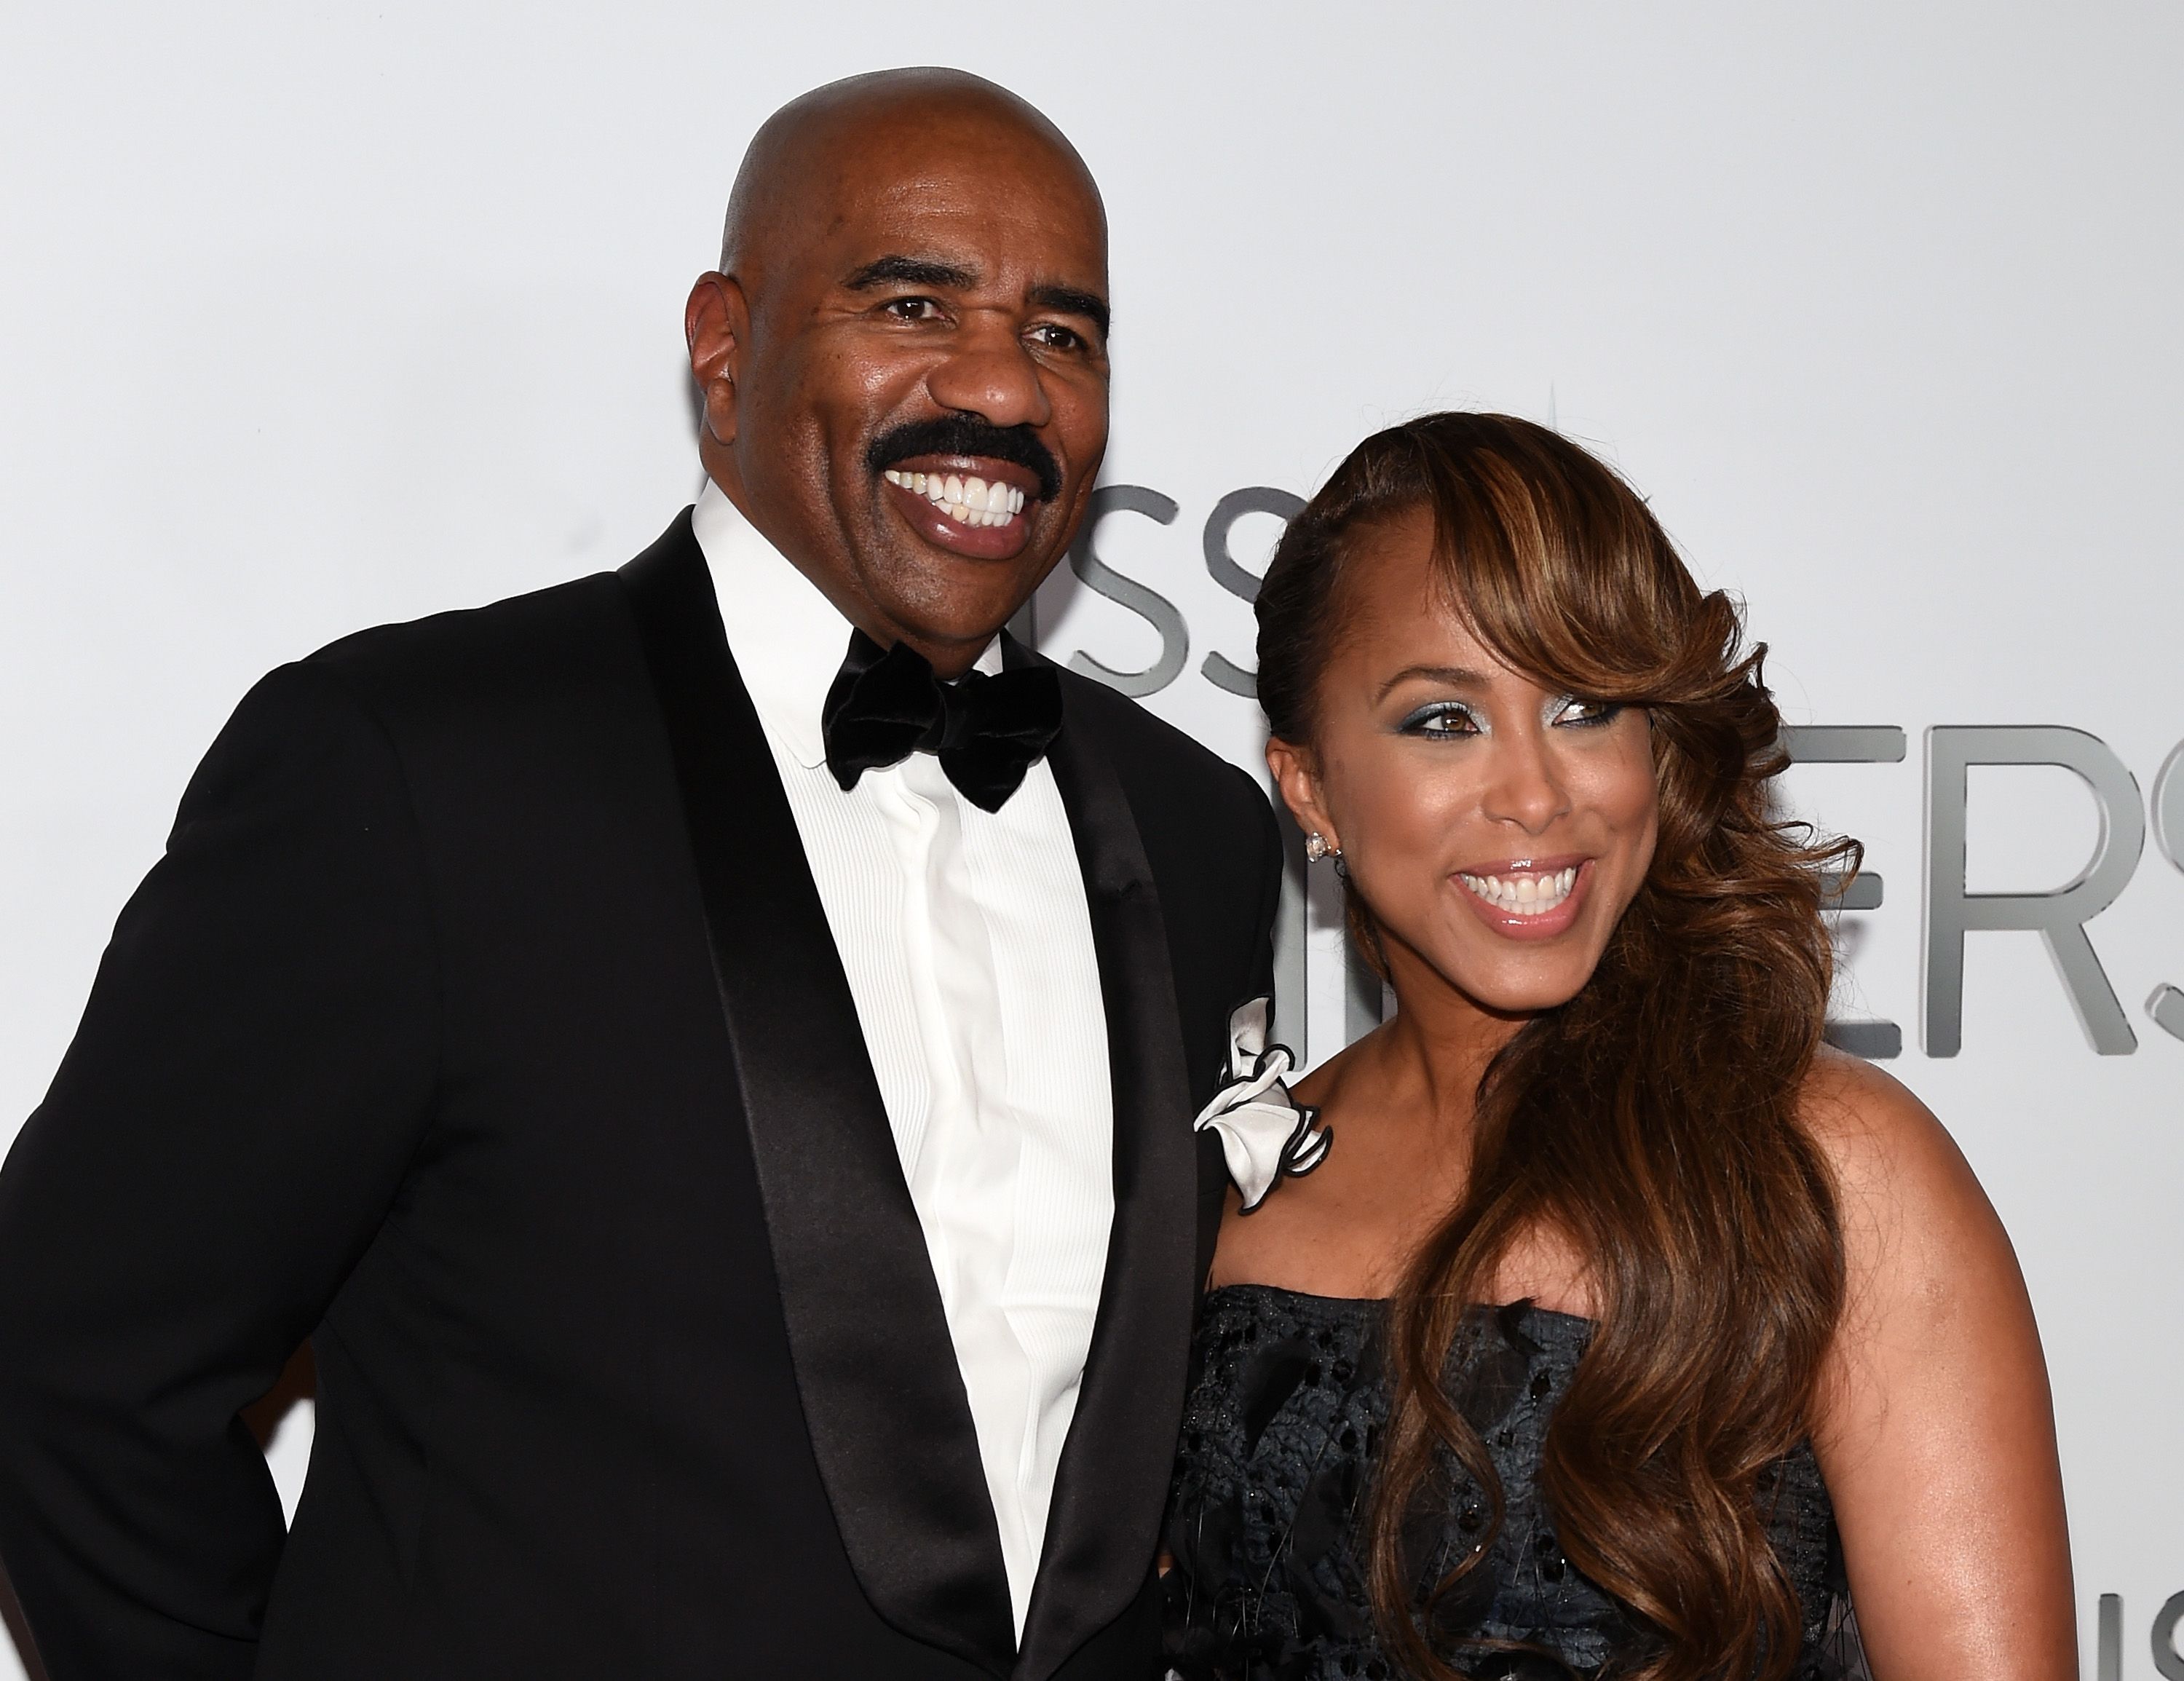 Steve Harvey and Marjorie Harvey at the 2015 Miss Universe Pageant at Planet Hollywood Resort & Casino on December 20, 2015. | Photo: Getty Images